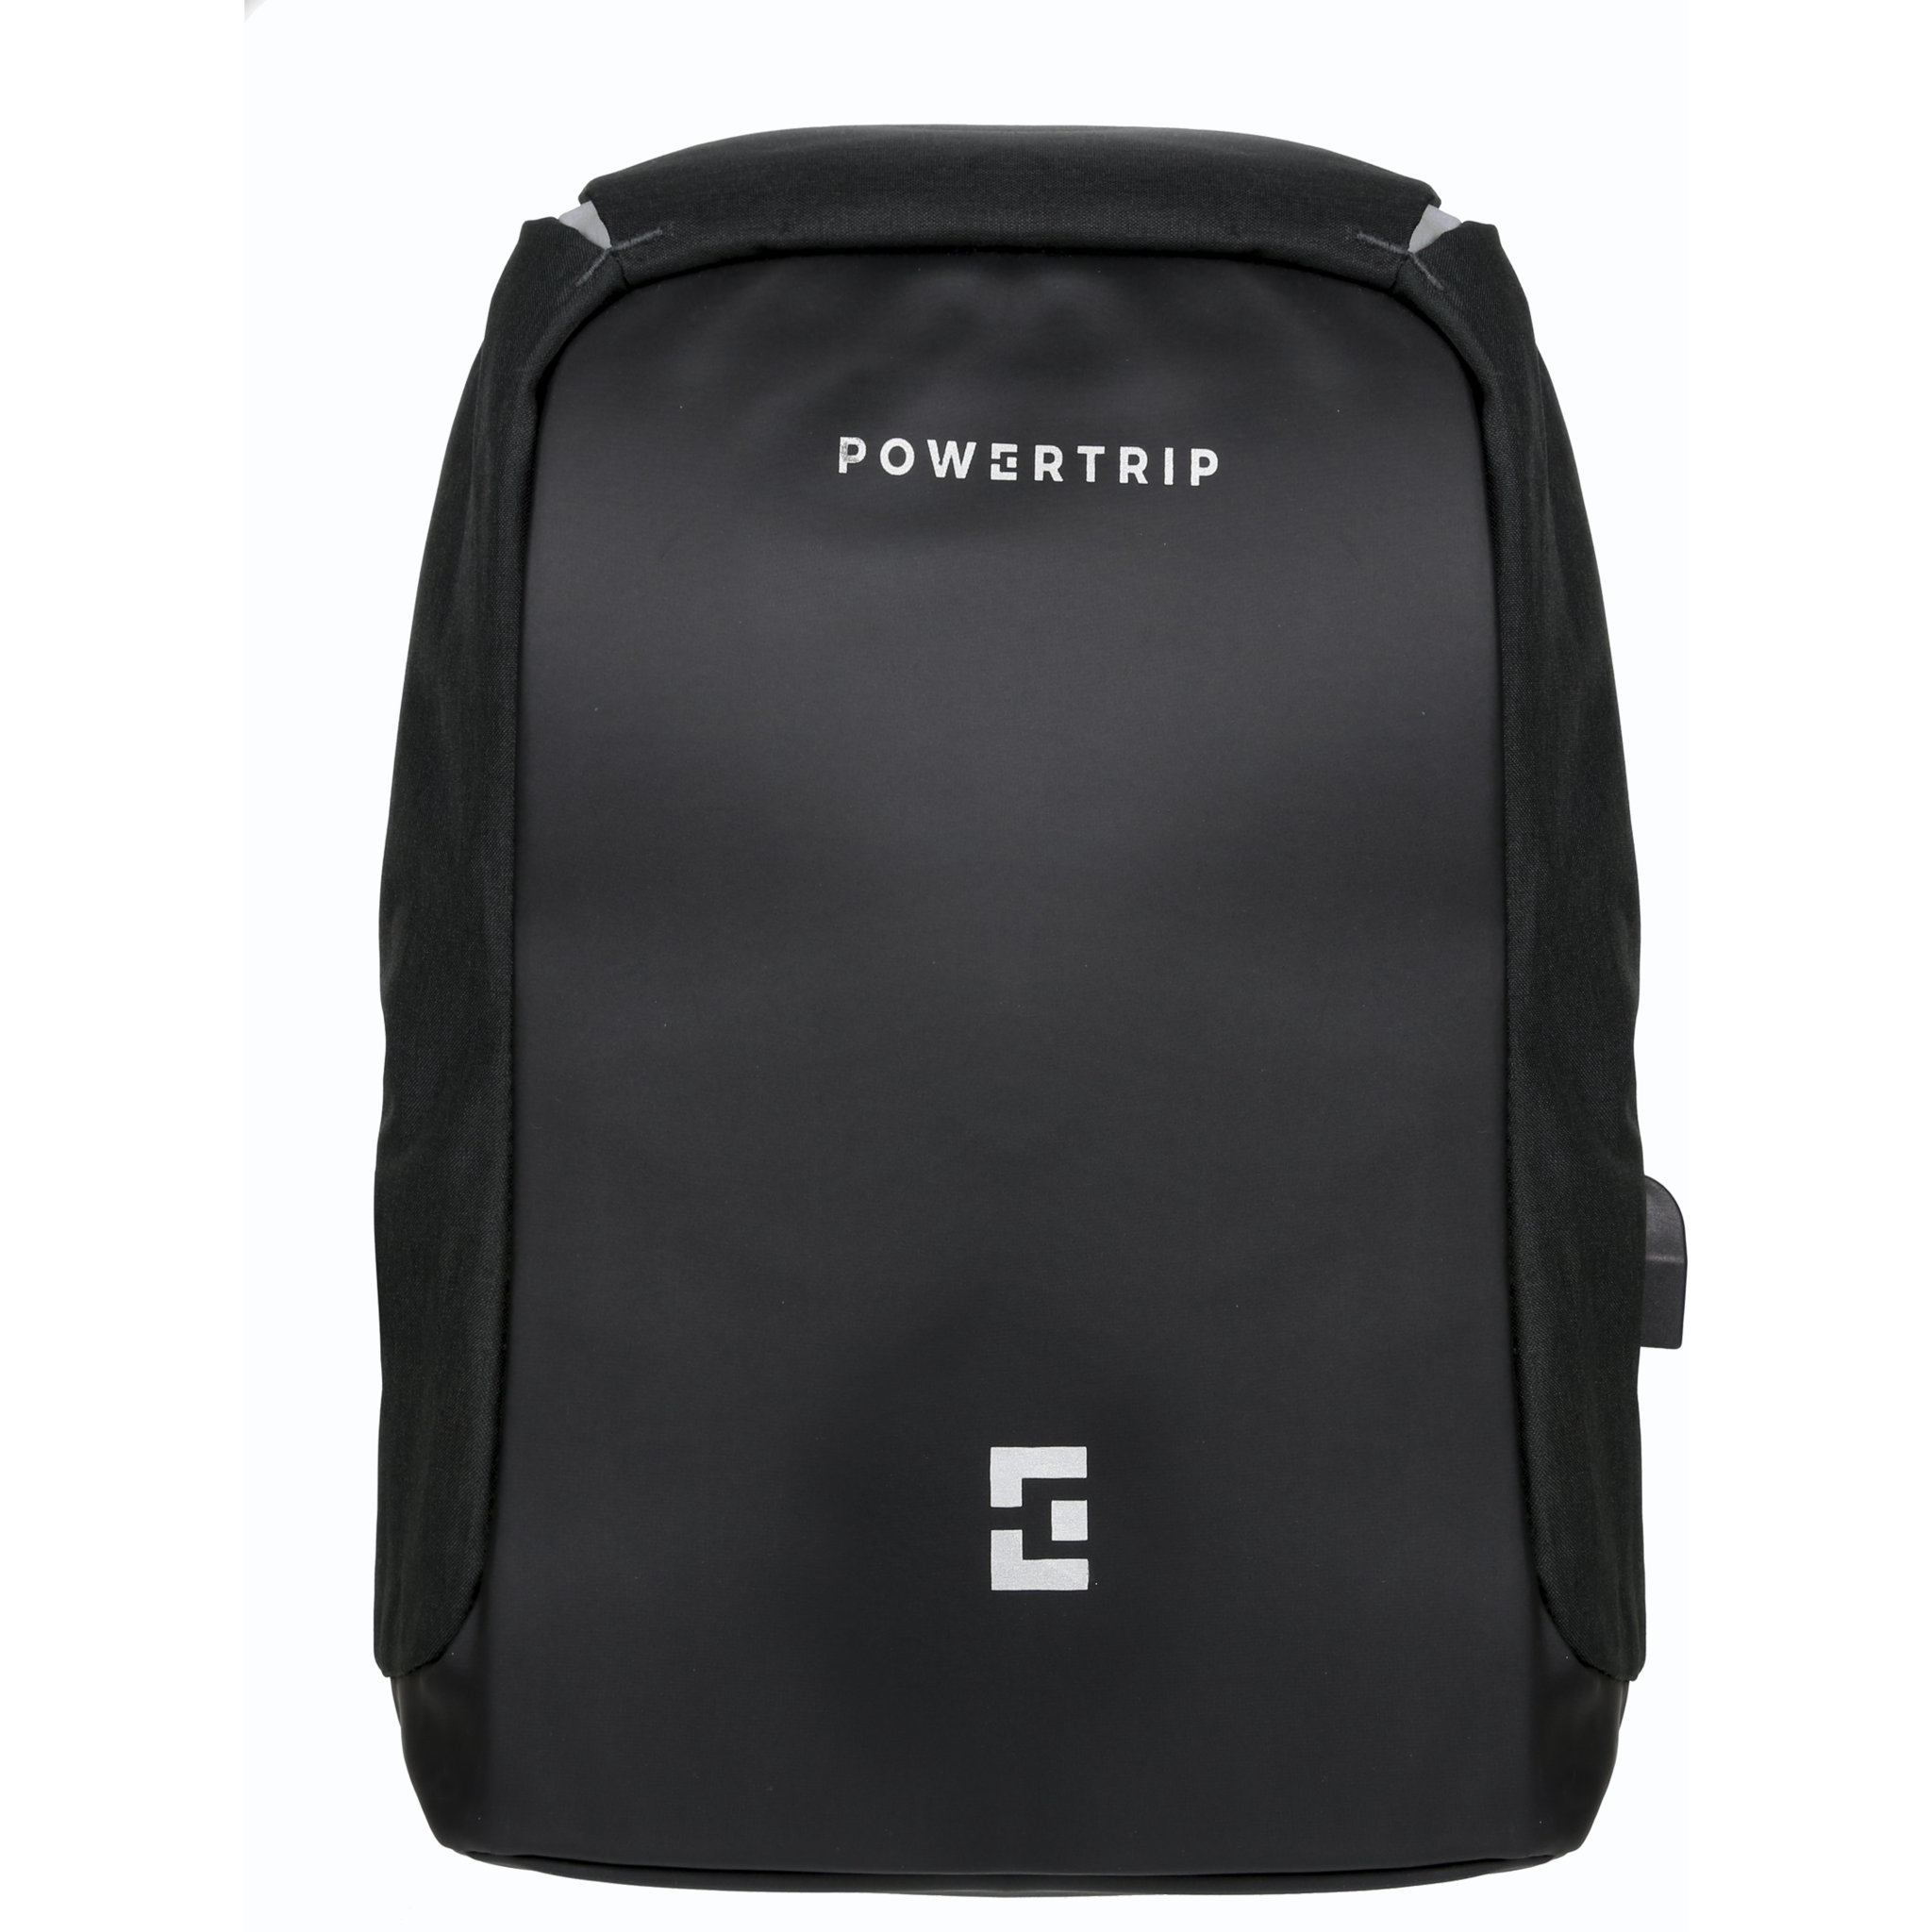 Powertrip Smart Backpack With 10,000mAh Powerbank And Water Bottle